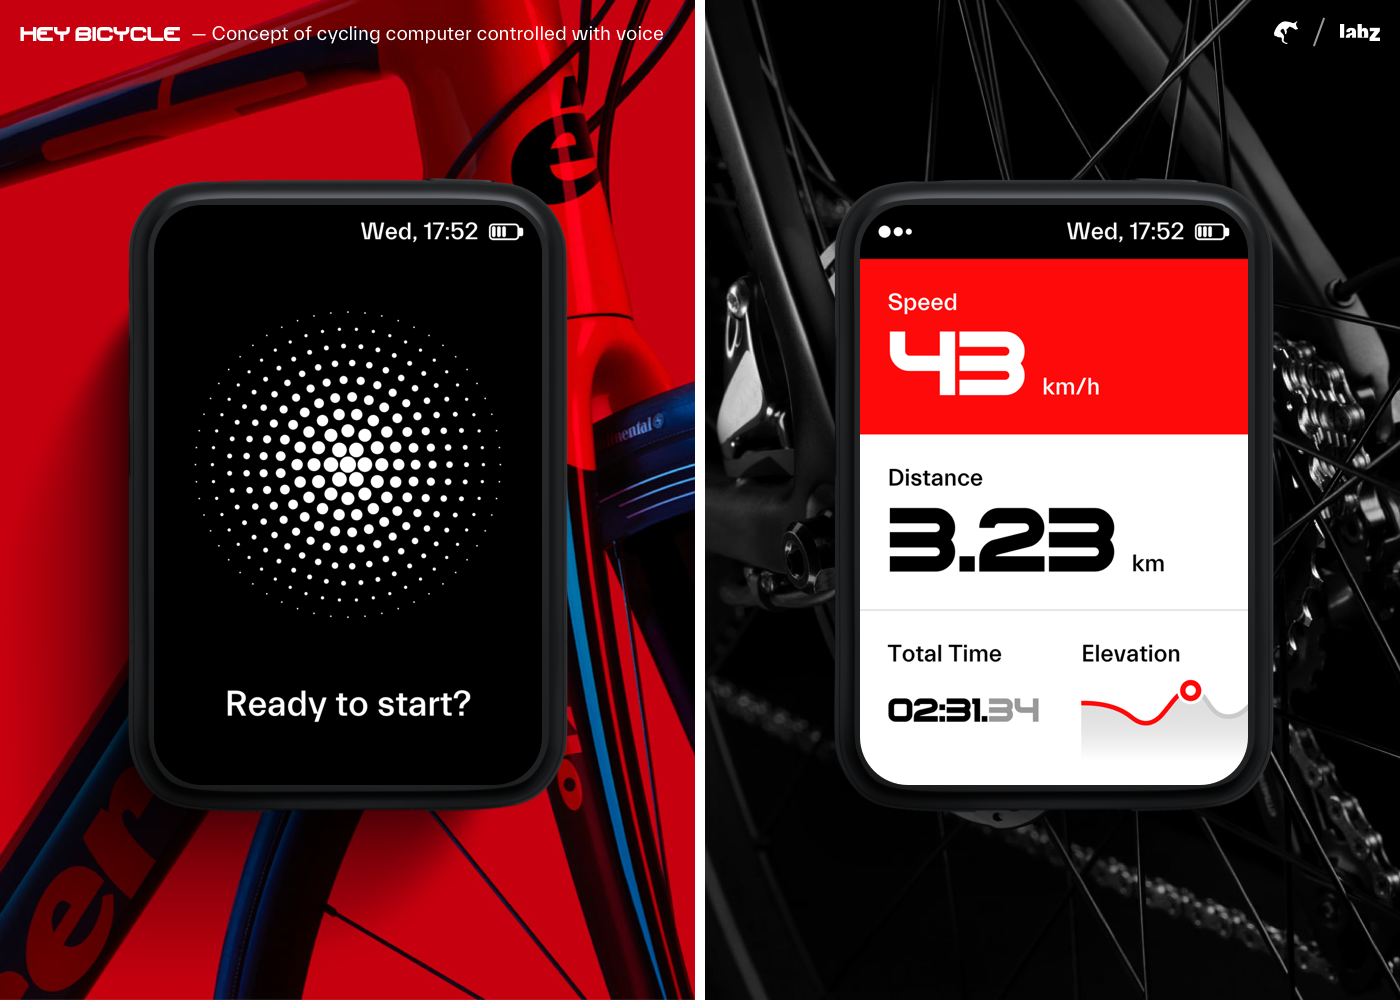 Bicycle CaseStudy fitness ux voice interface vui concept user experience